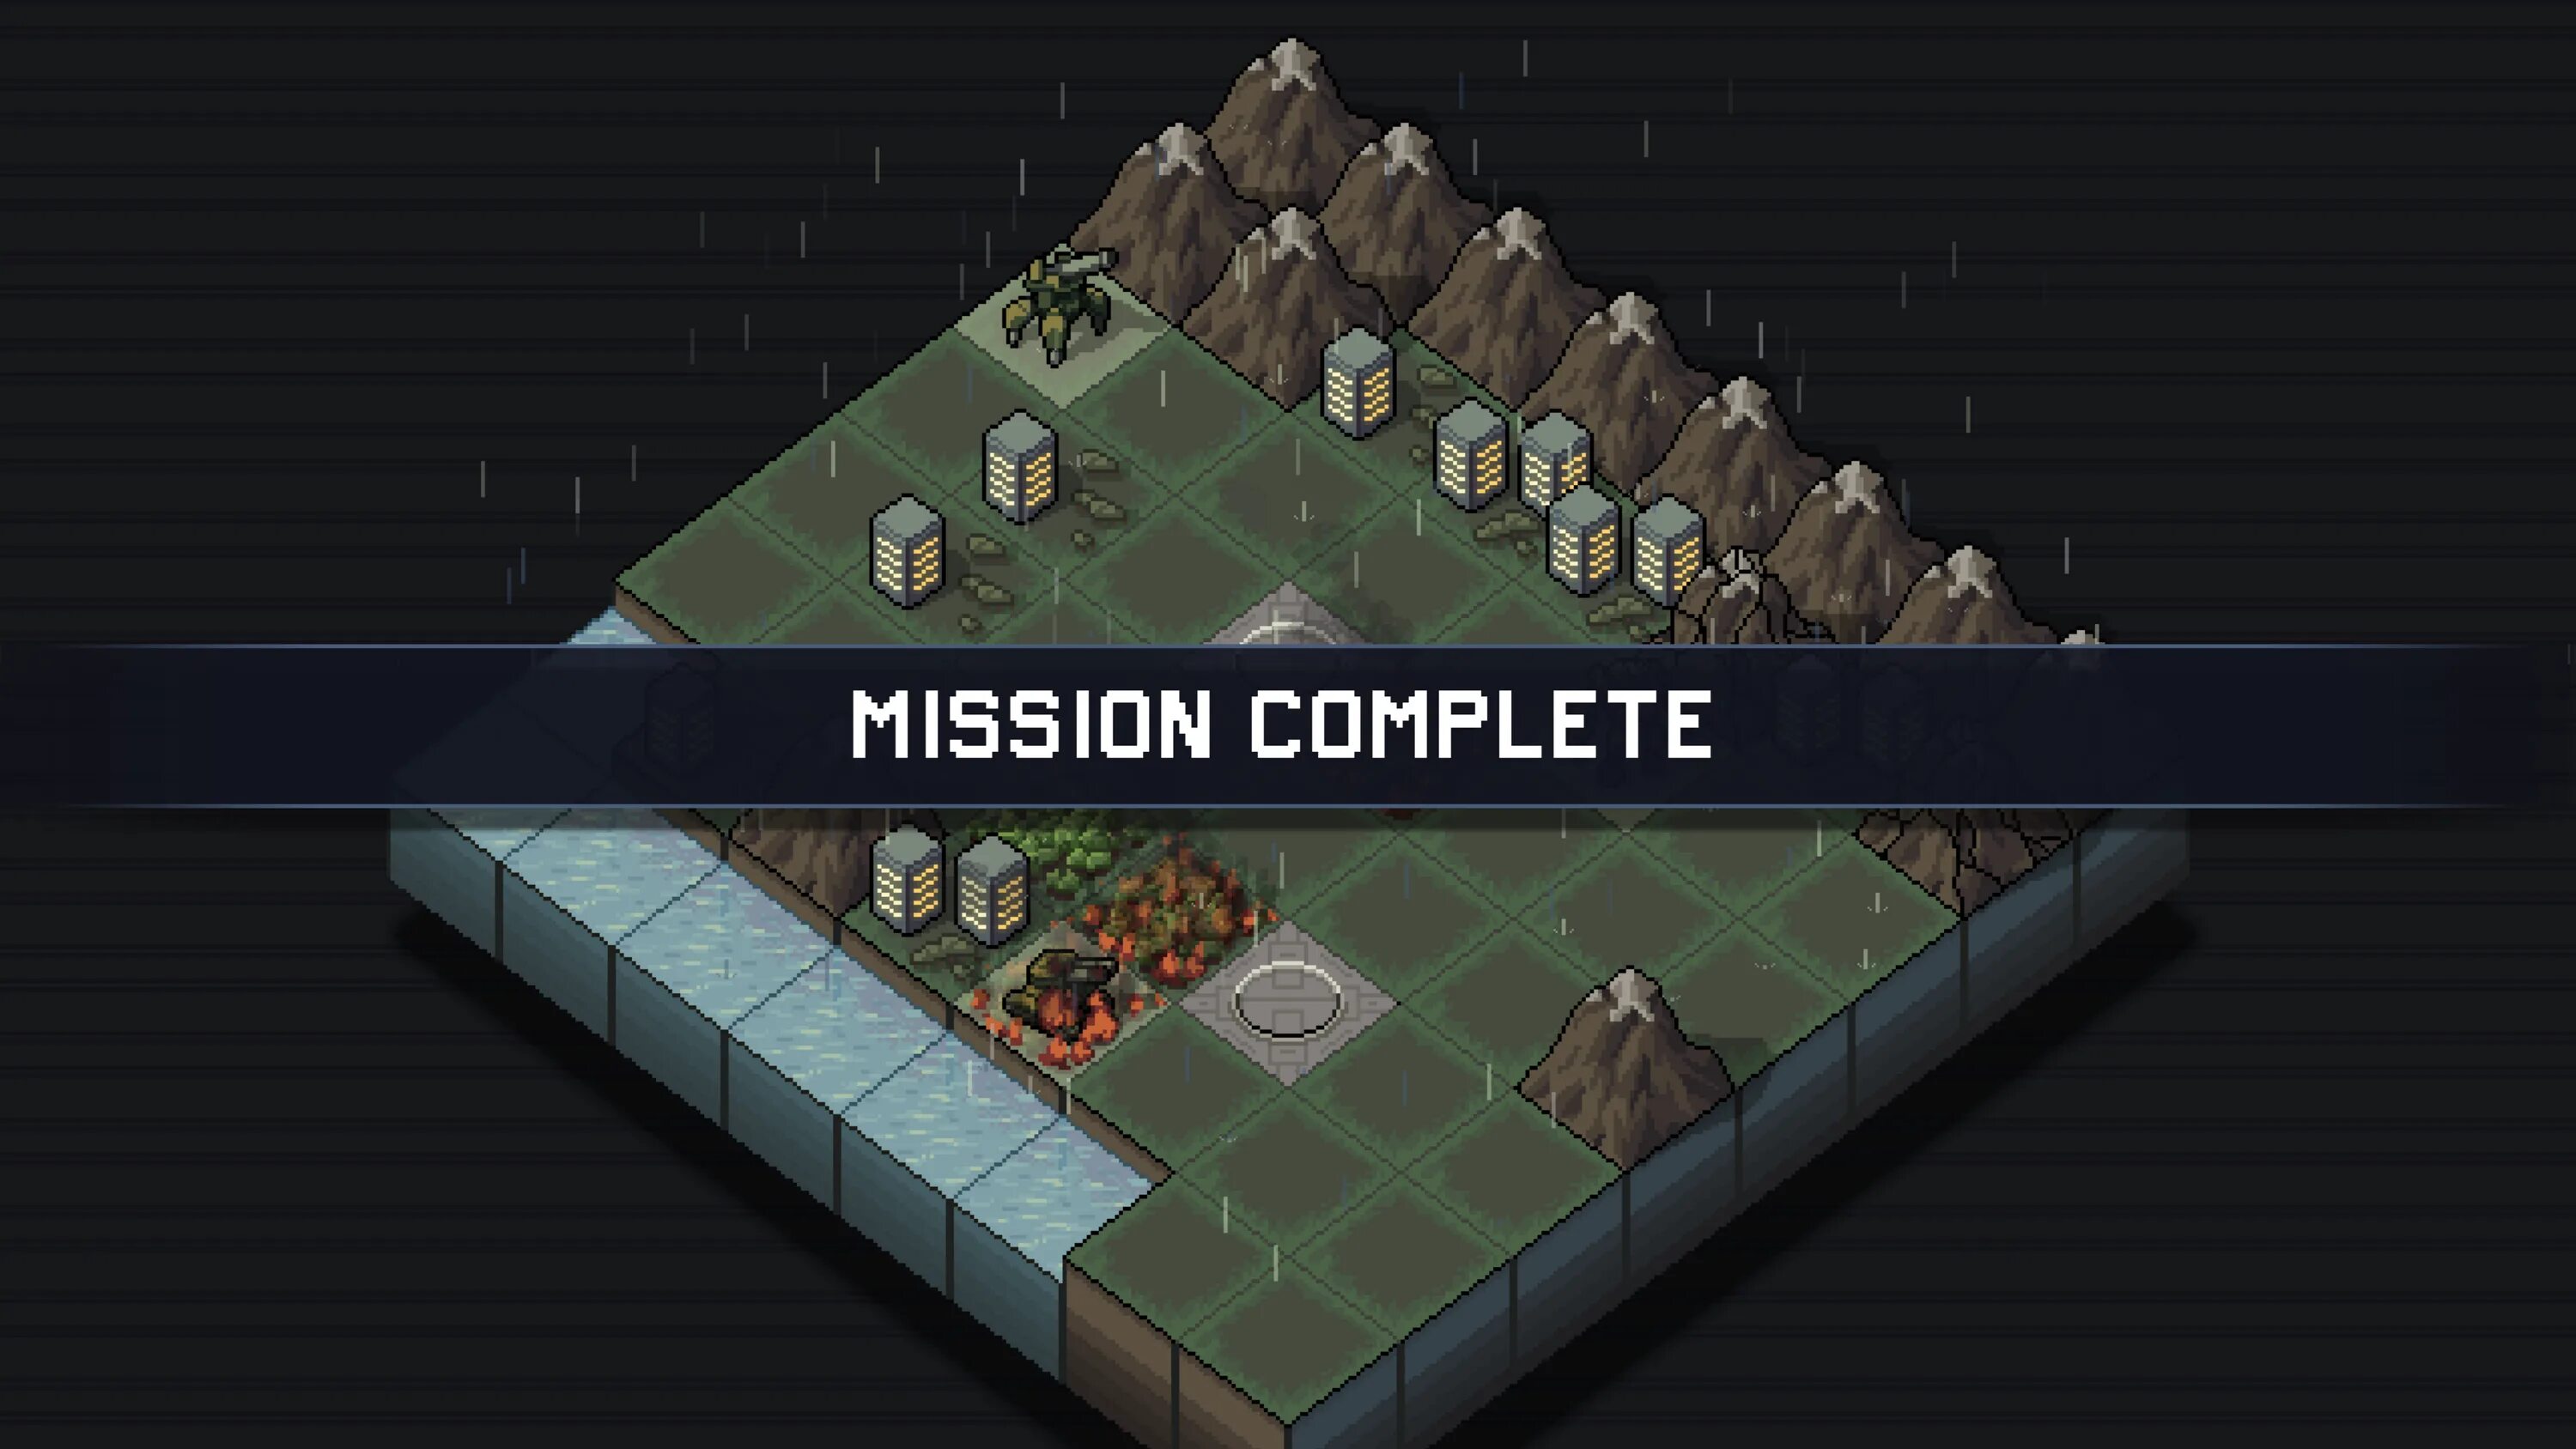 Mission completed игра. Миссия комплит. Mission complete UI. Time Breach игра. You have completed the game